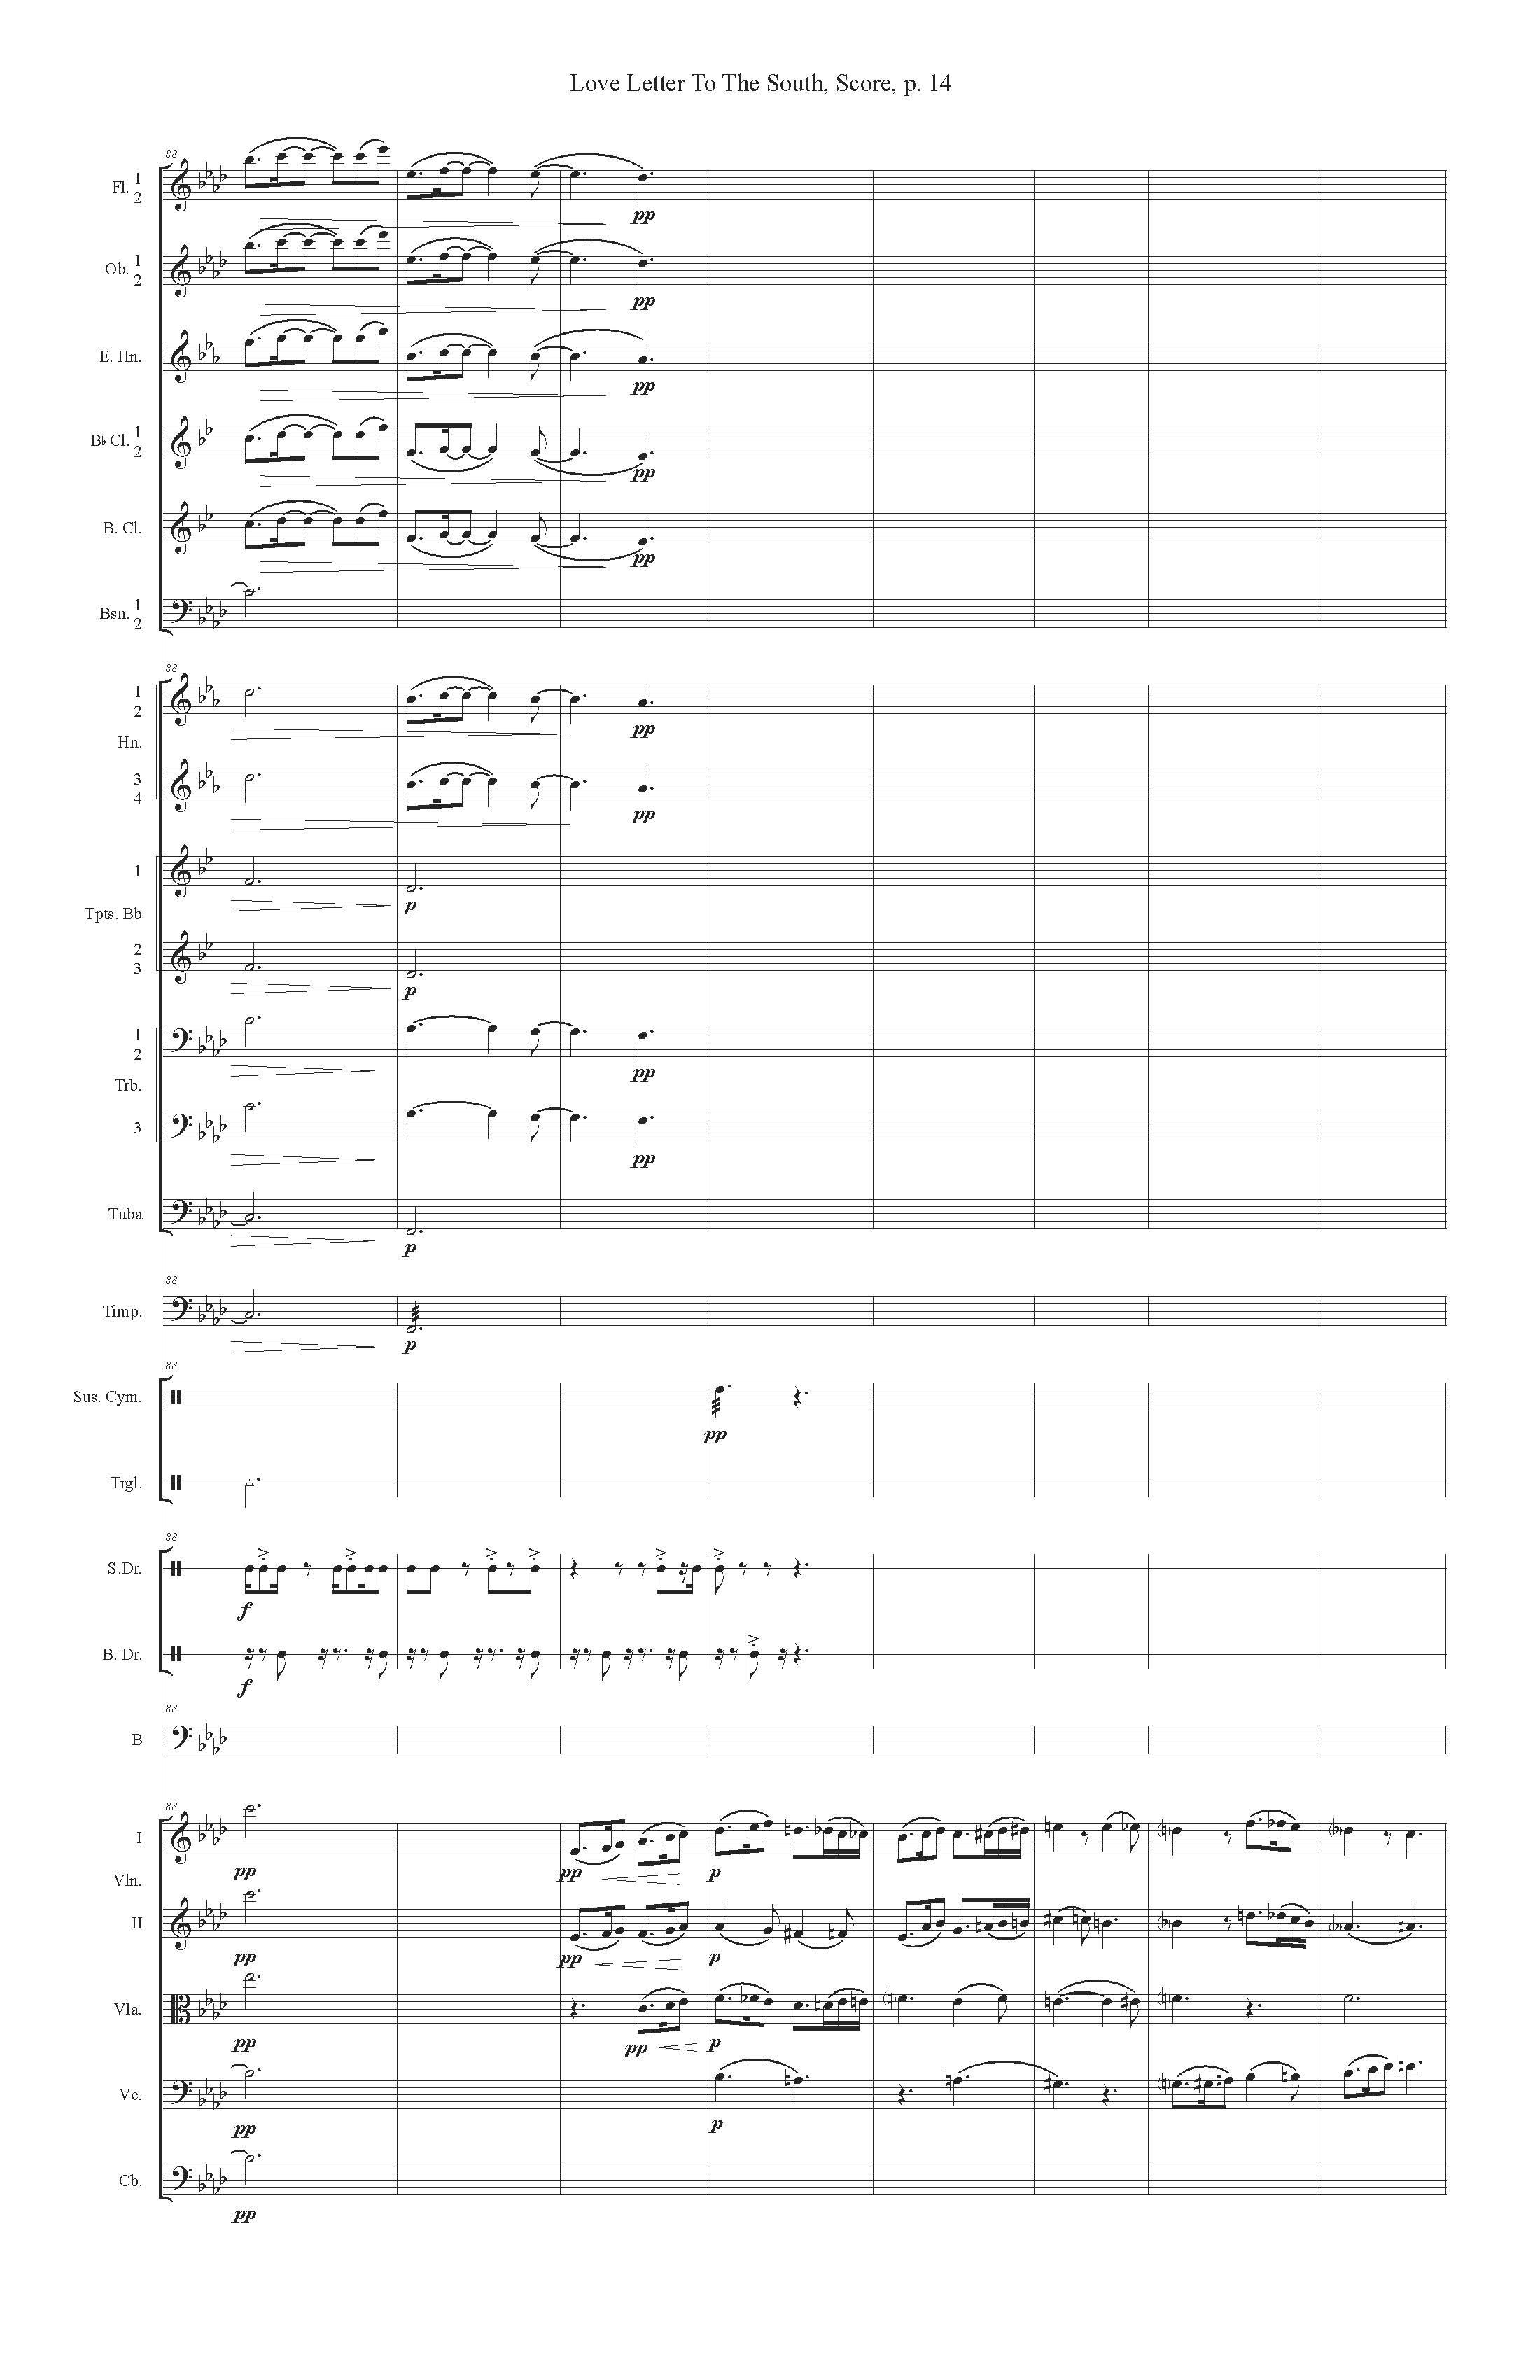 LOVE LETTER TO THE SOUTH ORCH - Score_Page_14.jpg